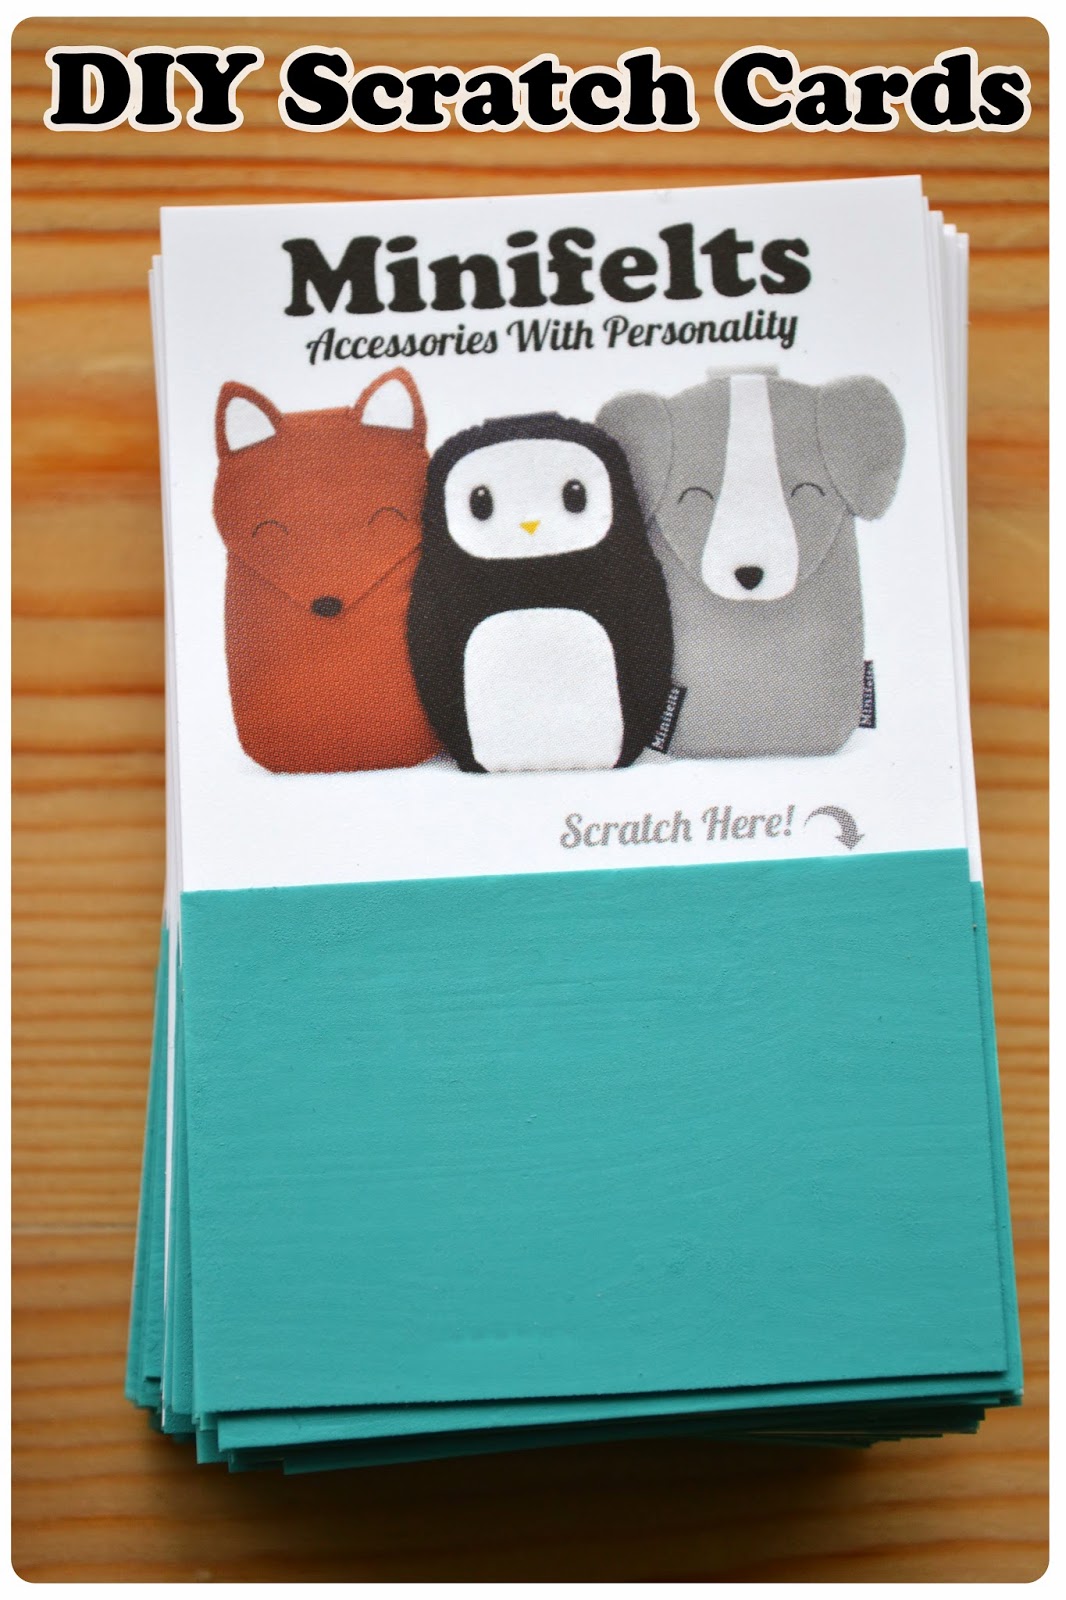 Minifelts: DIY - How to make your own scratch cards